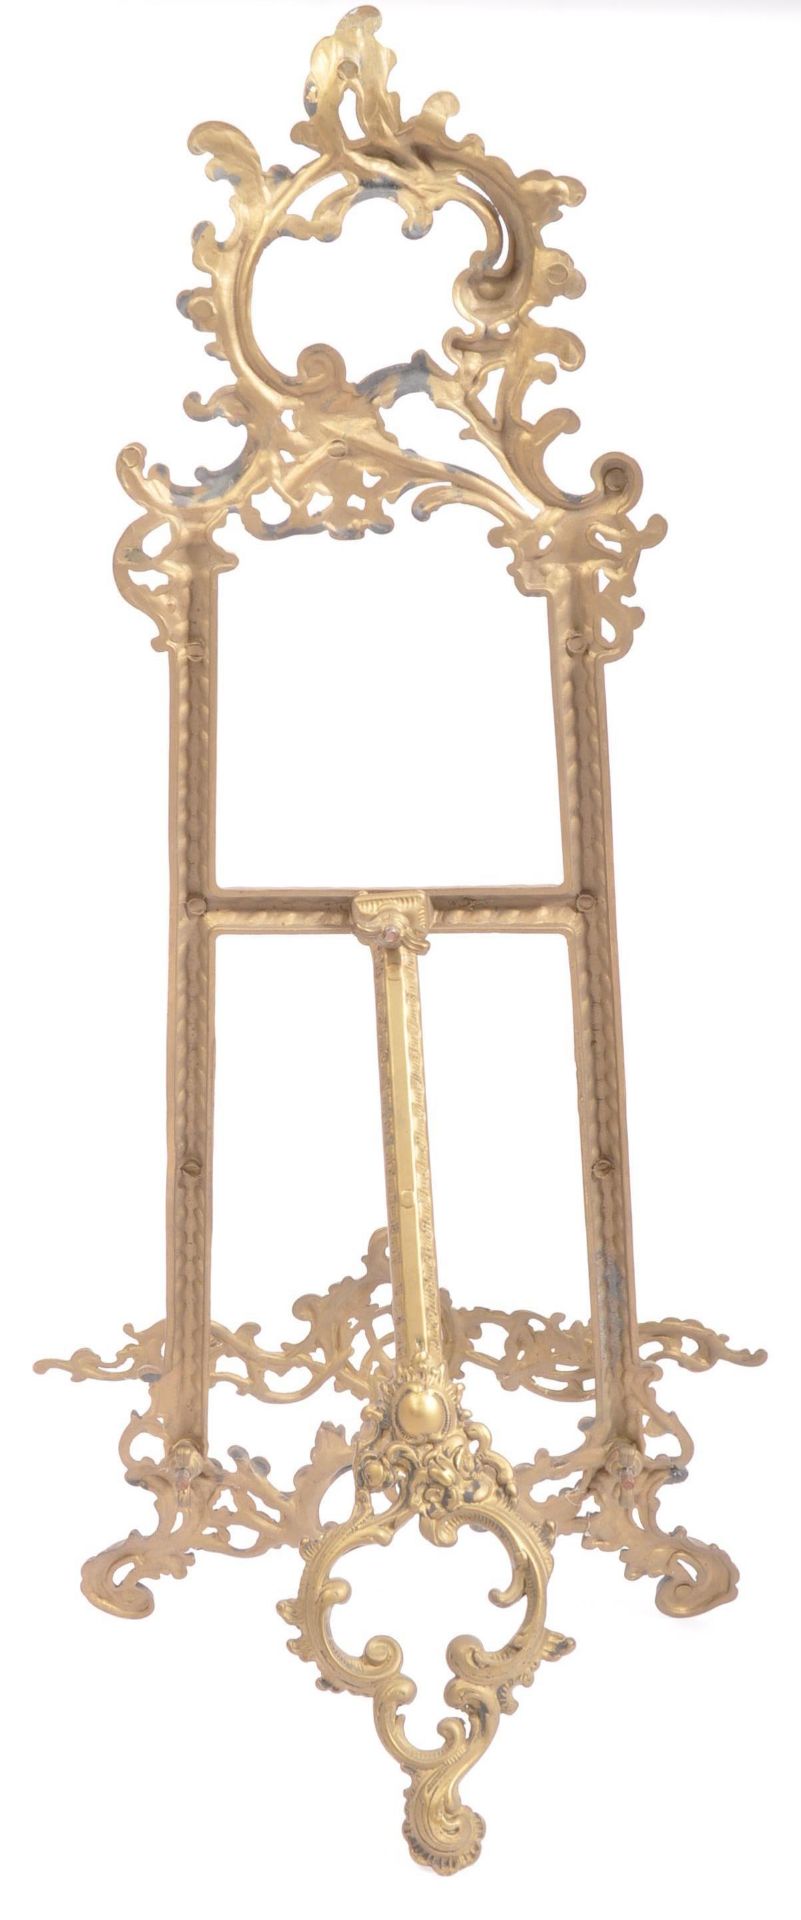 20TH CENTURY ART NOUVEAU GILT METAL PAINTING EASEL STAND - Image 3 of 5